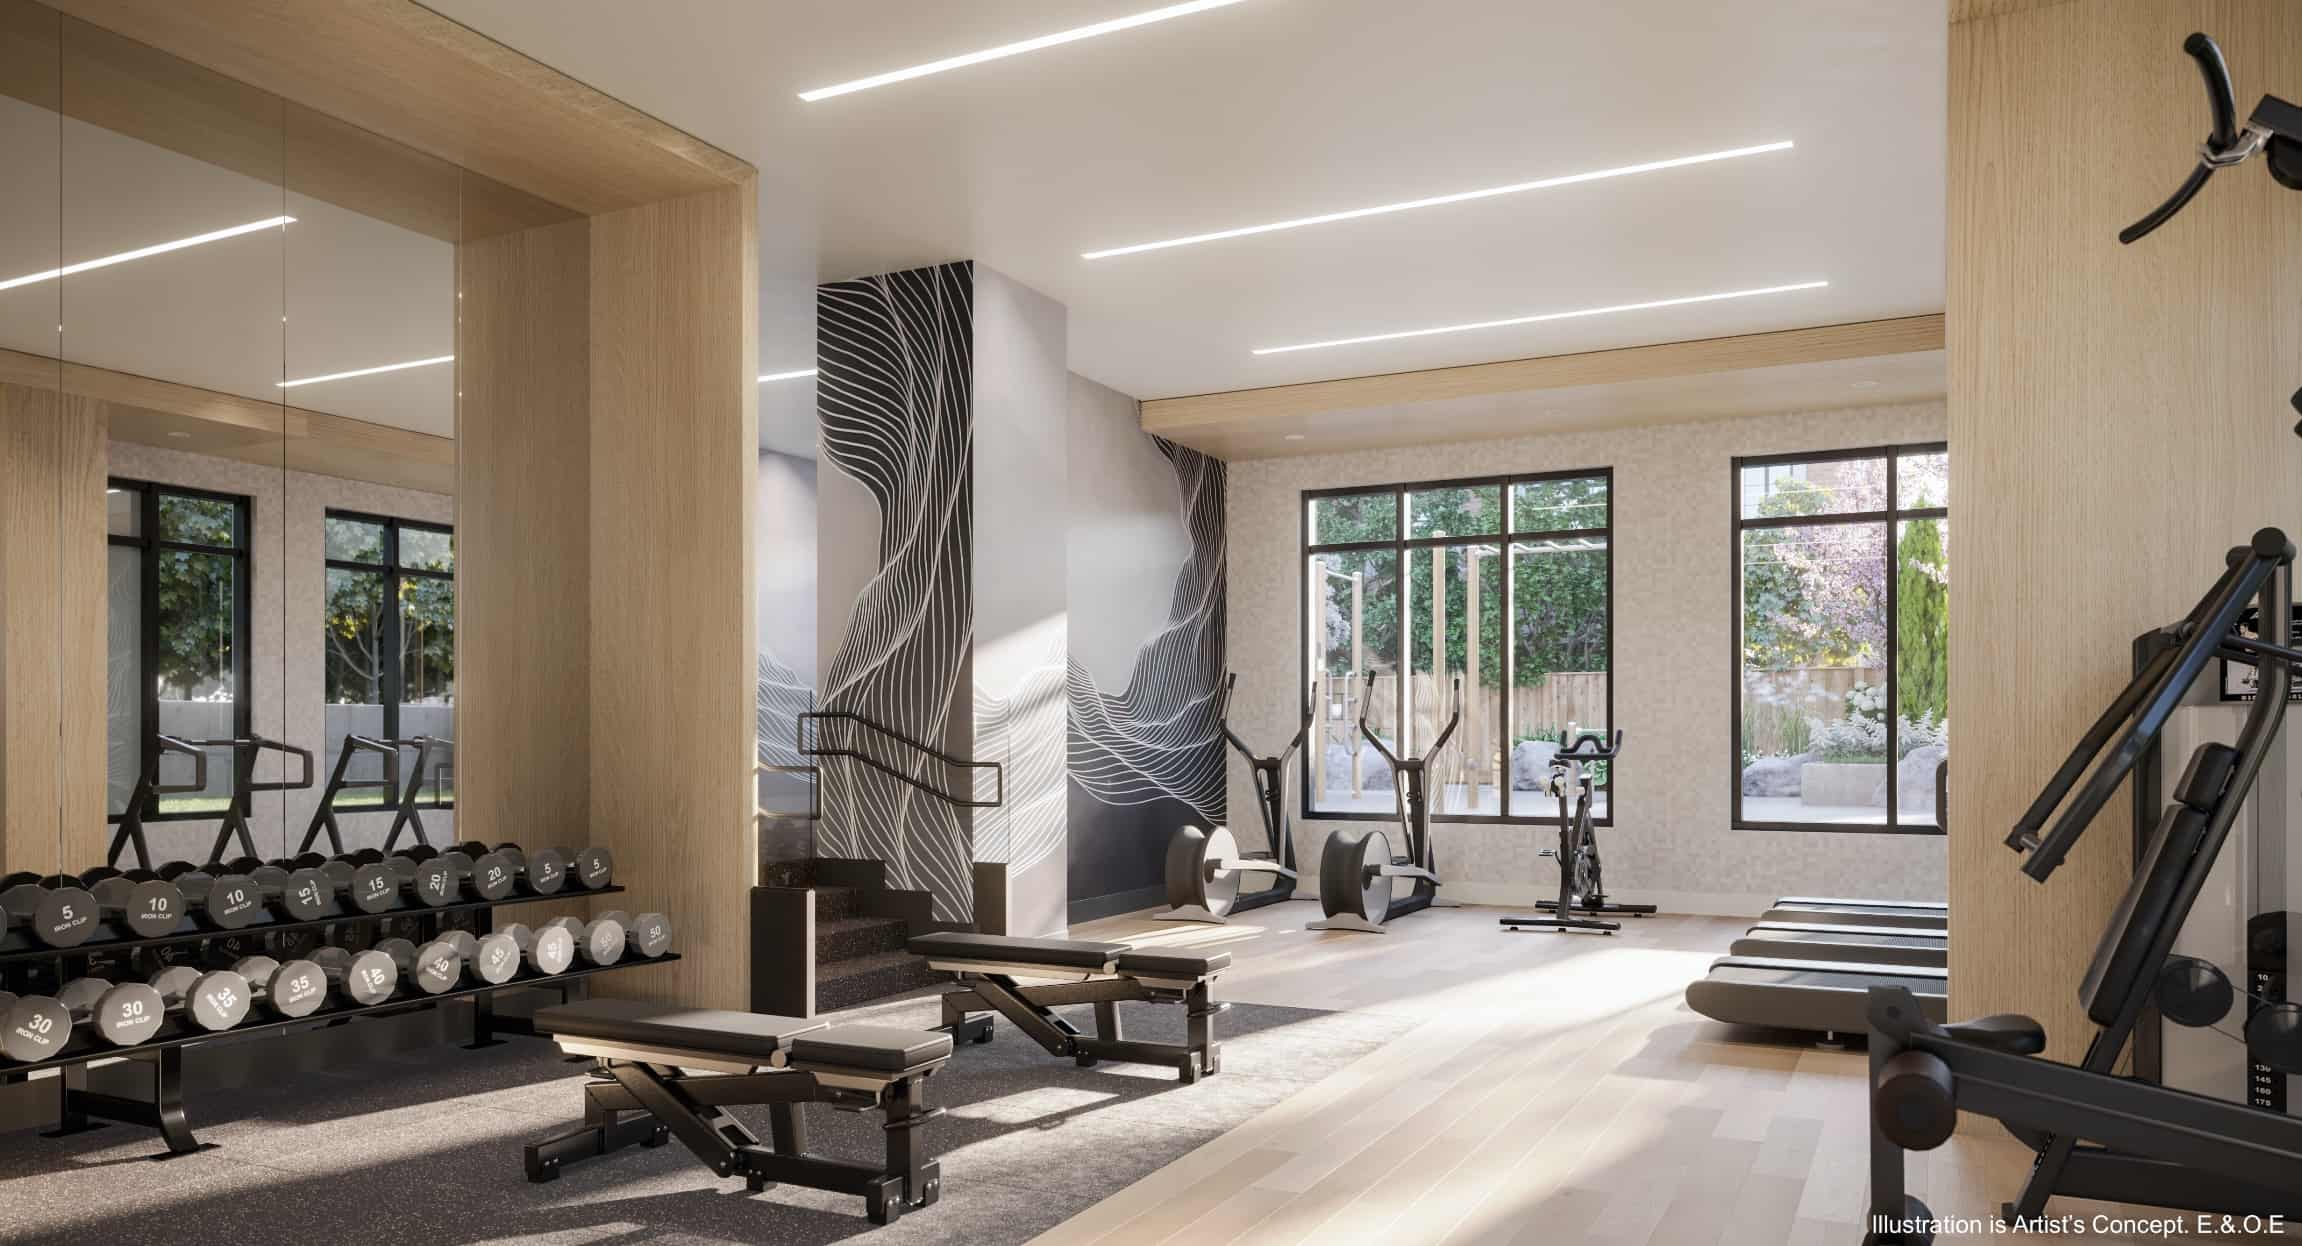 Boulevard at the Thornhill Fitness Gym Amenities True Condos